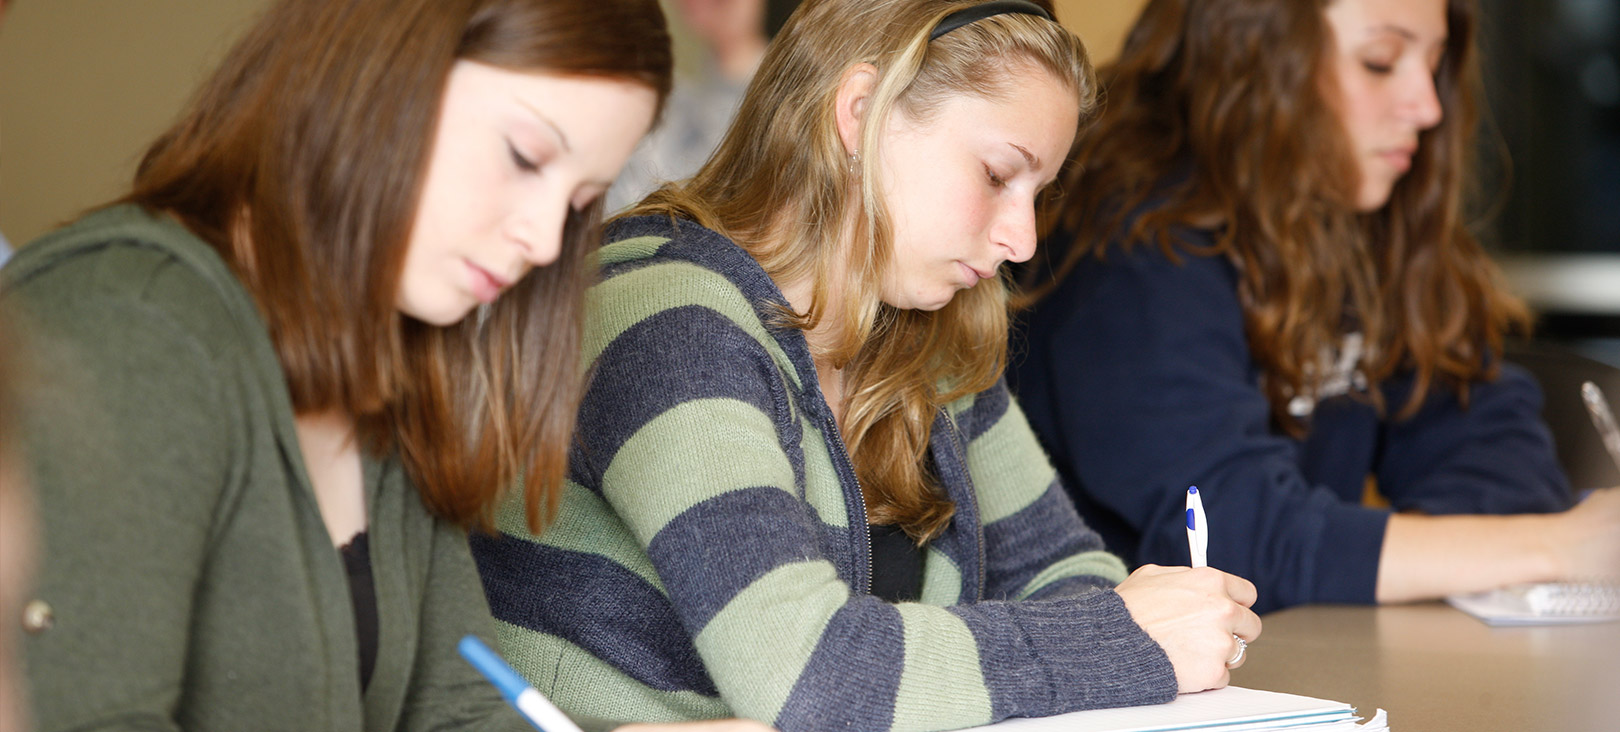 Creative Writing Minor or Concentration Three female creative writing students writing something in their notebooks.jpg